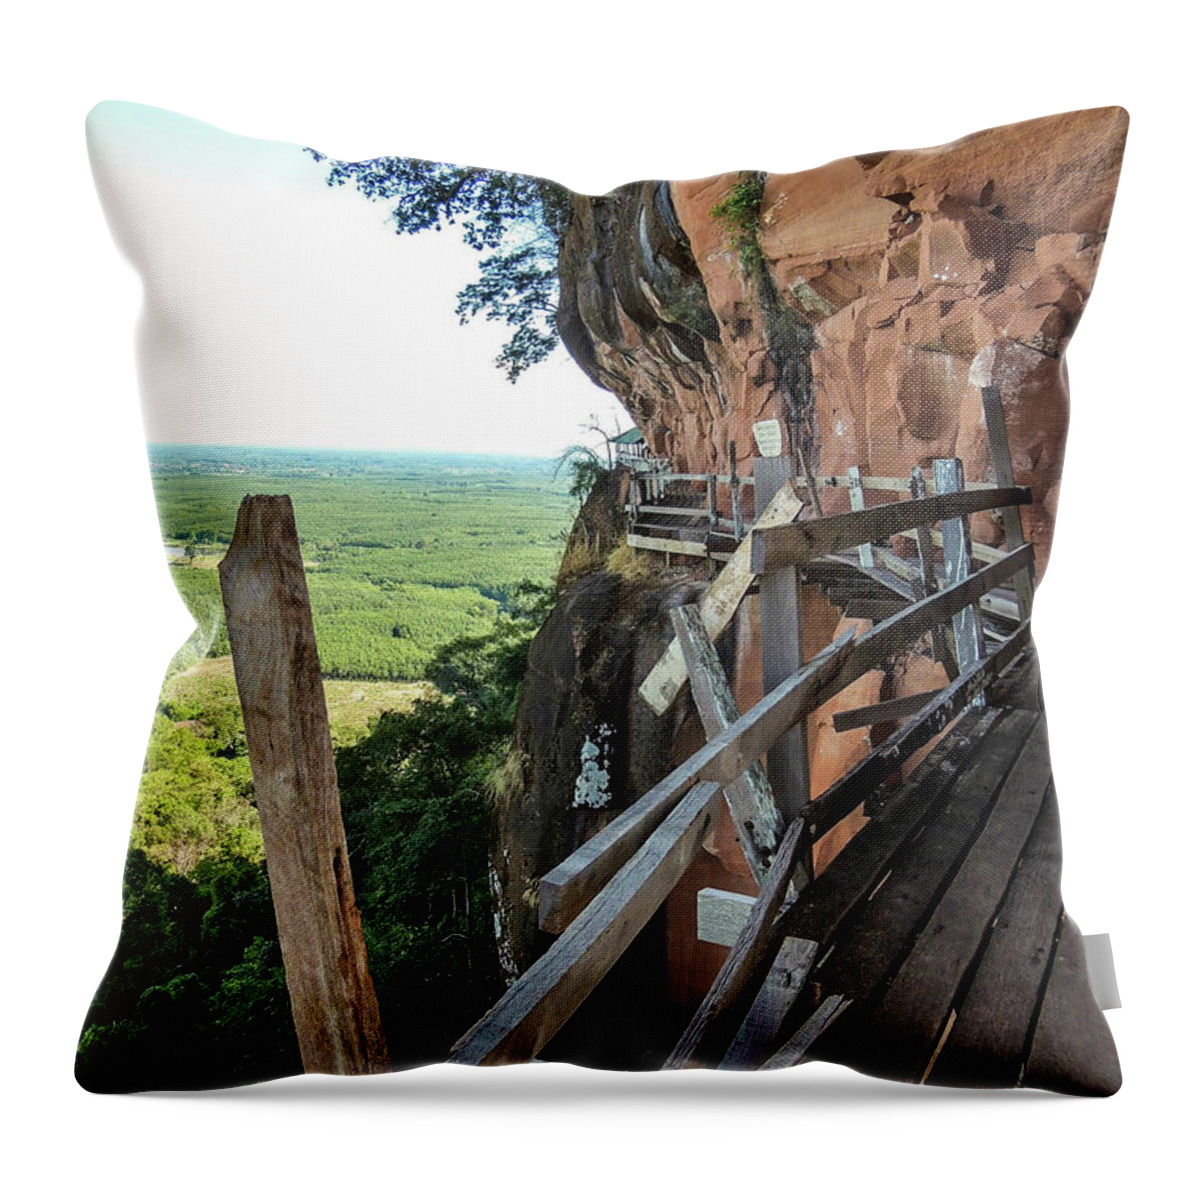 Issan Throw Pillow featuring the photograph We take our guests here if they are brave enough by Jeremy Holton